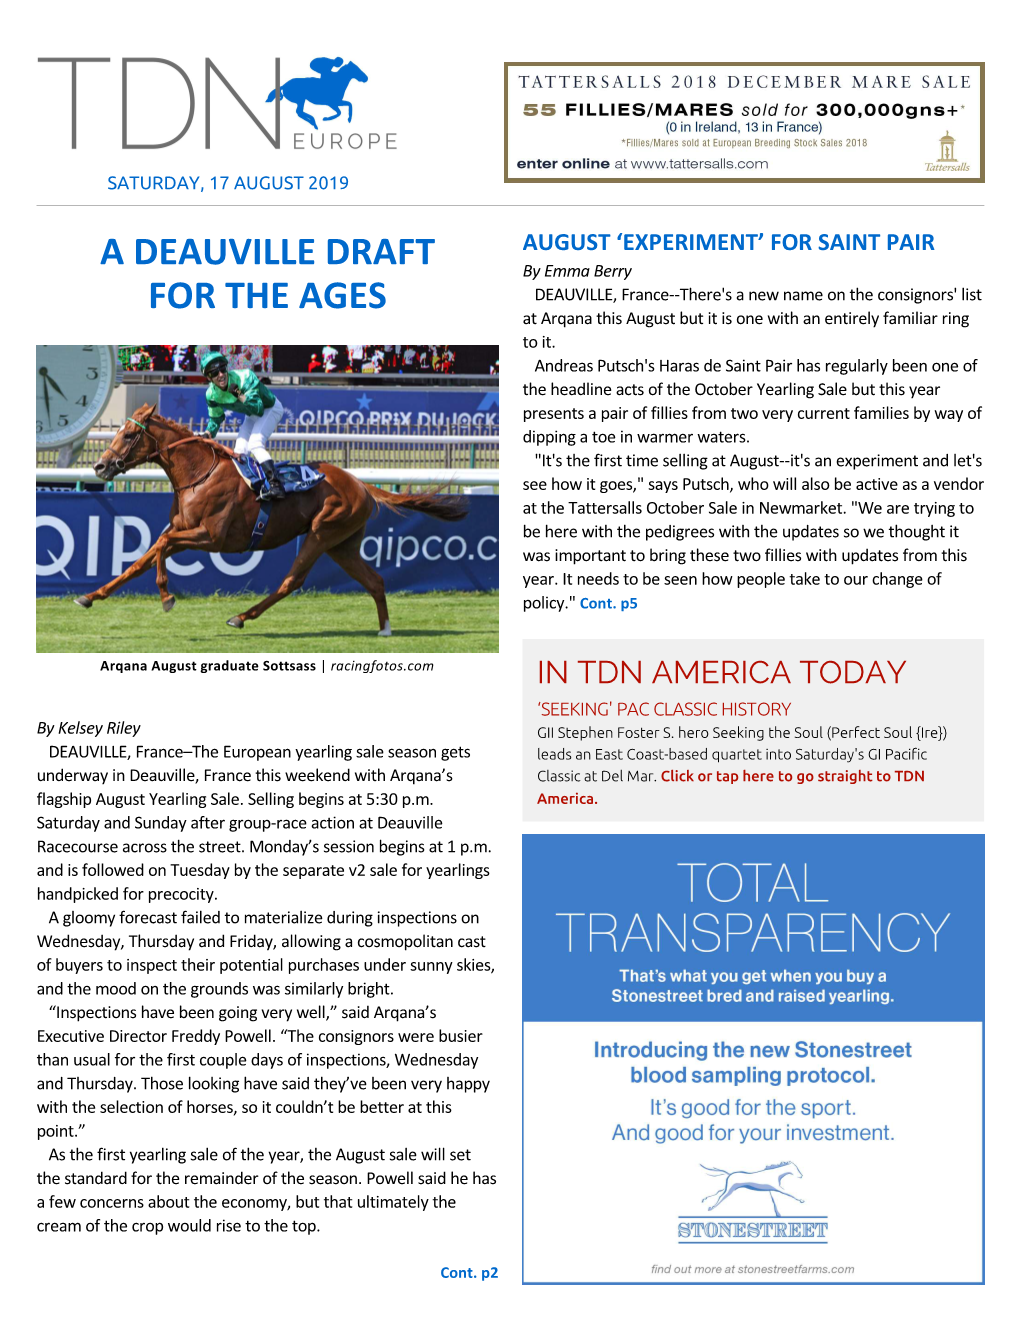 A Deauville Draft for the Ages Cont